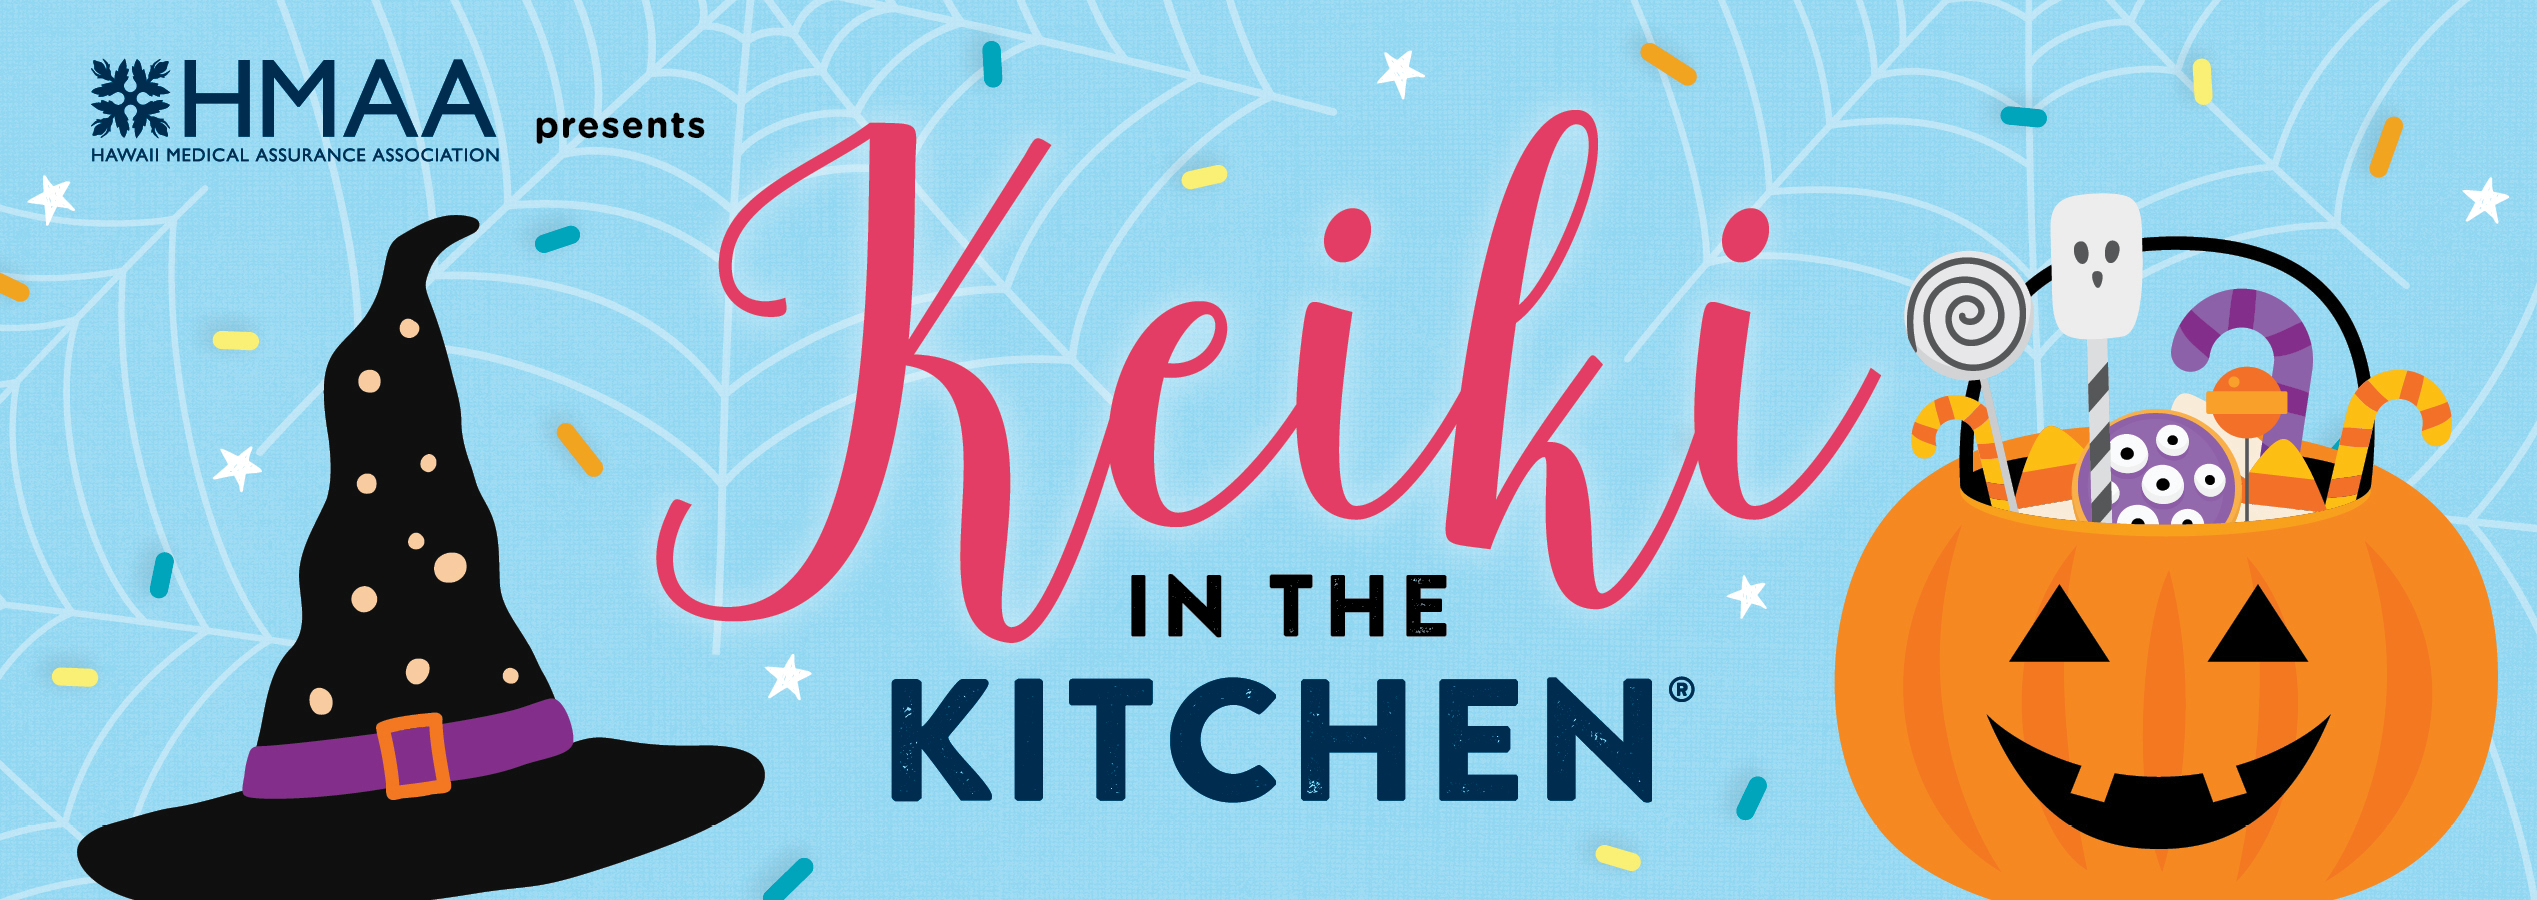 HMAA Presents Keiki in the Kitchen with Chef Roy Yamaguchi